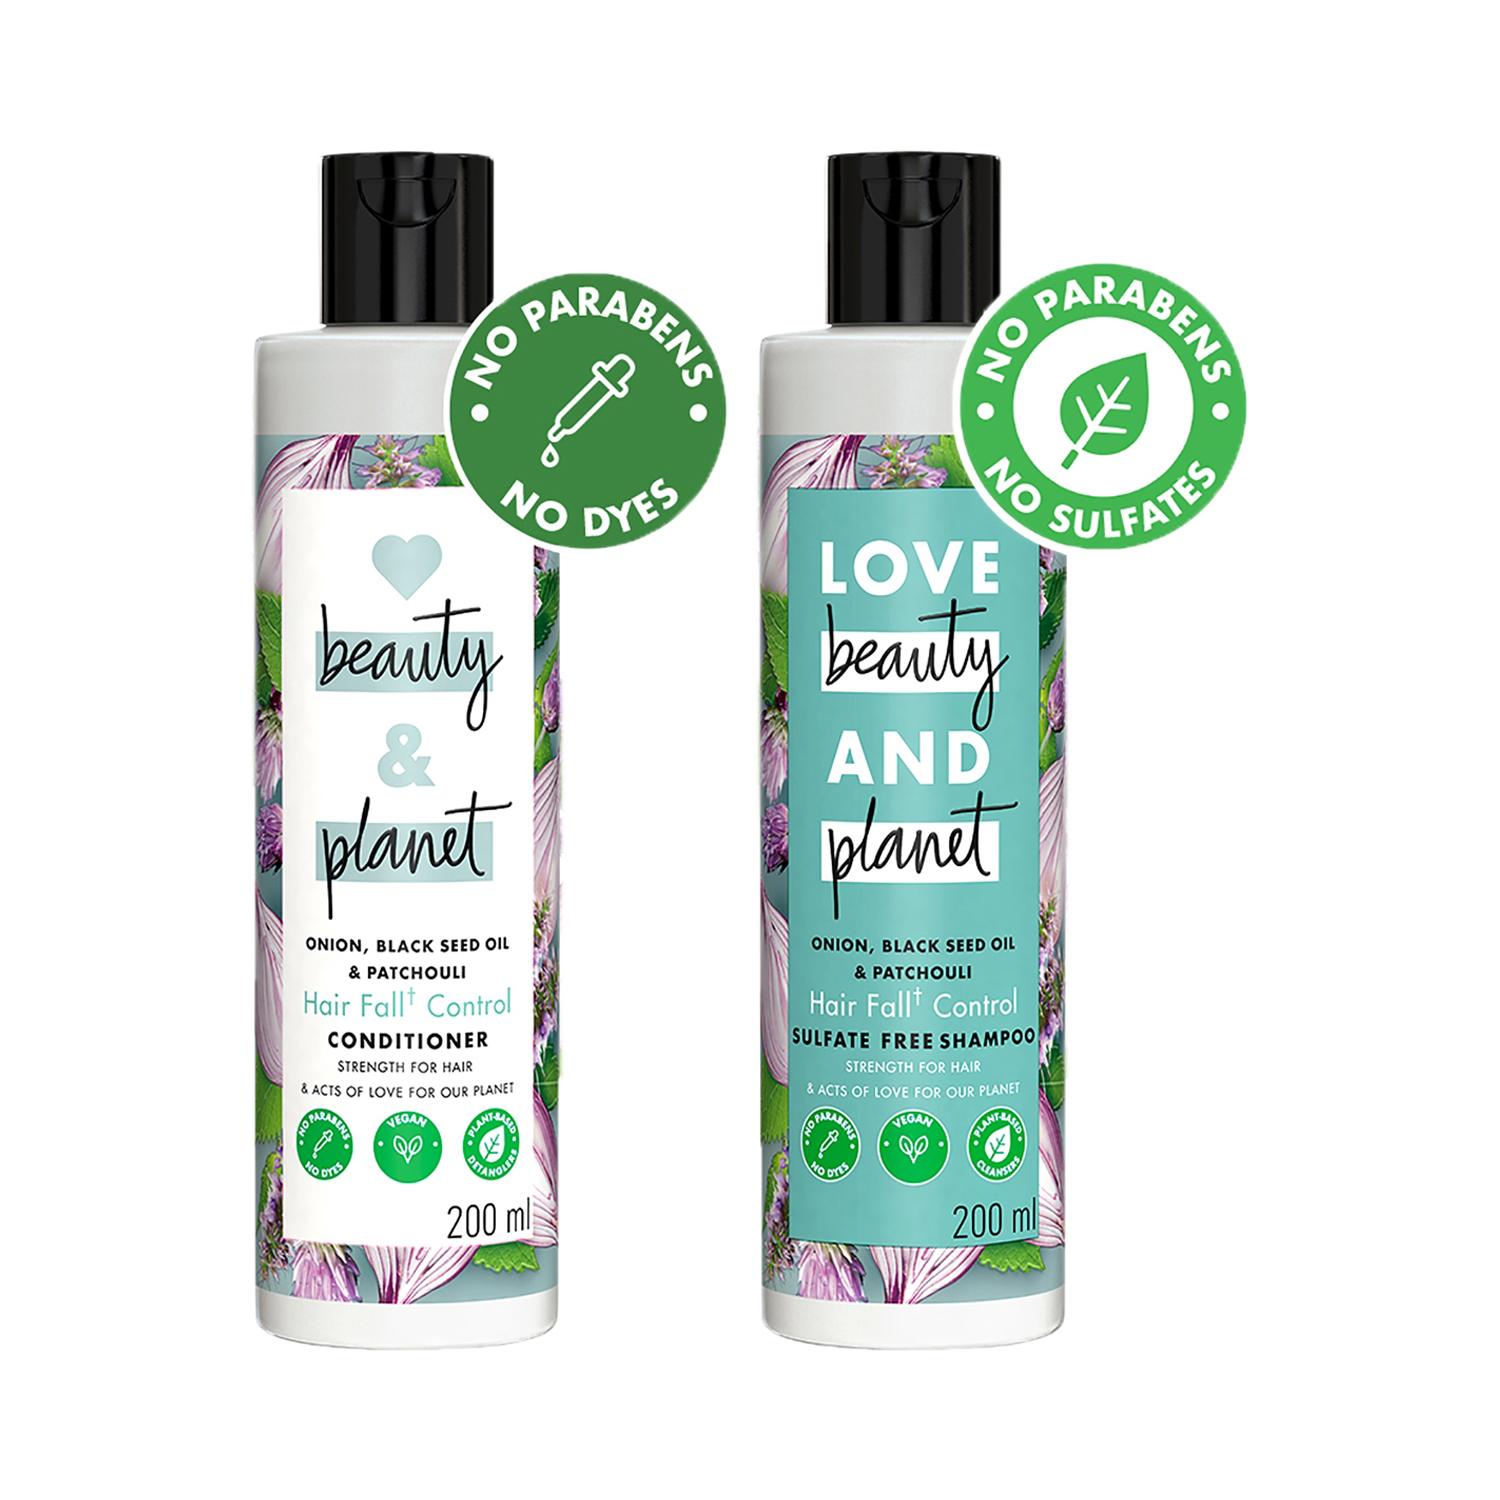 Love Beauty & Planet | Love Beauty & Planet Onion Black Seed & Patchouli Hairfall Control Shampoo & Conditioner Combo